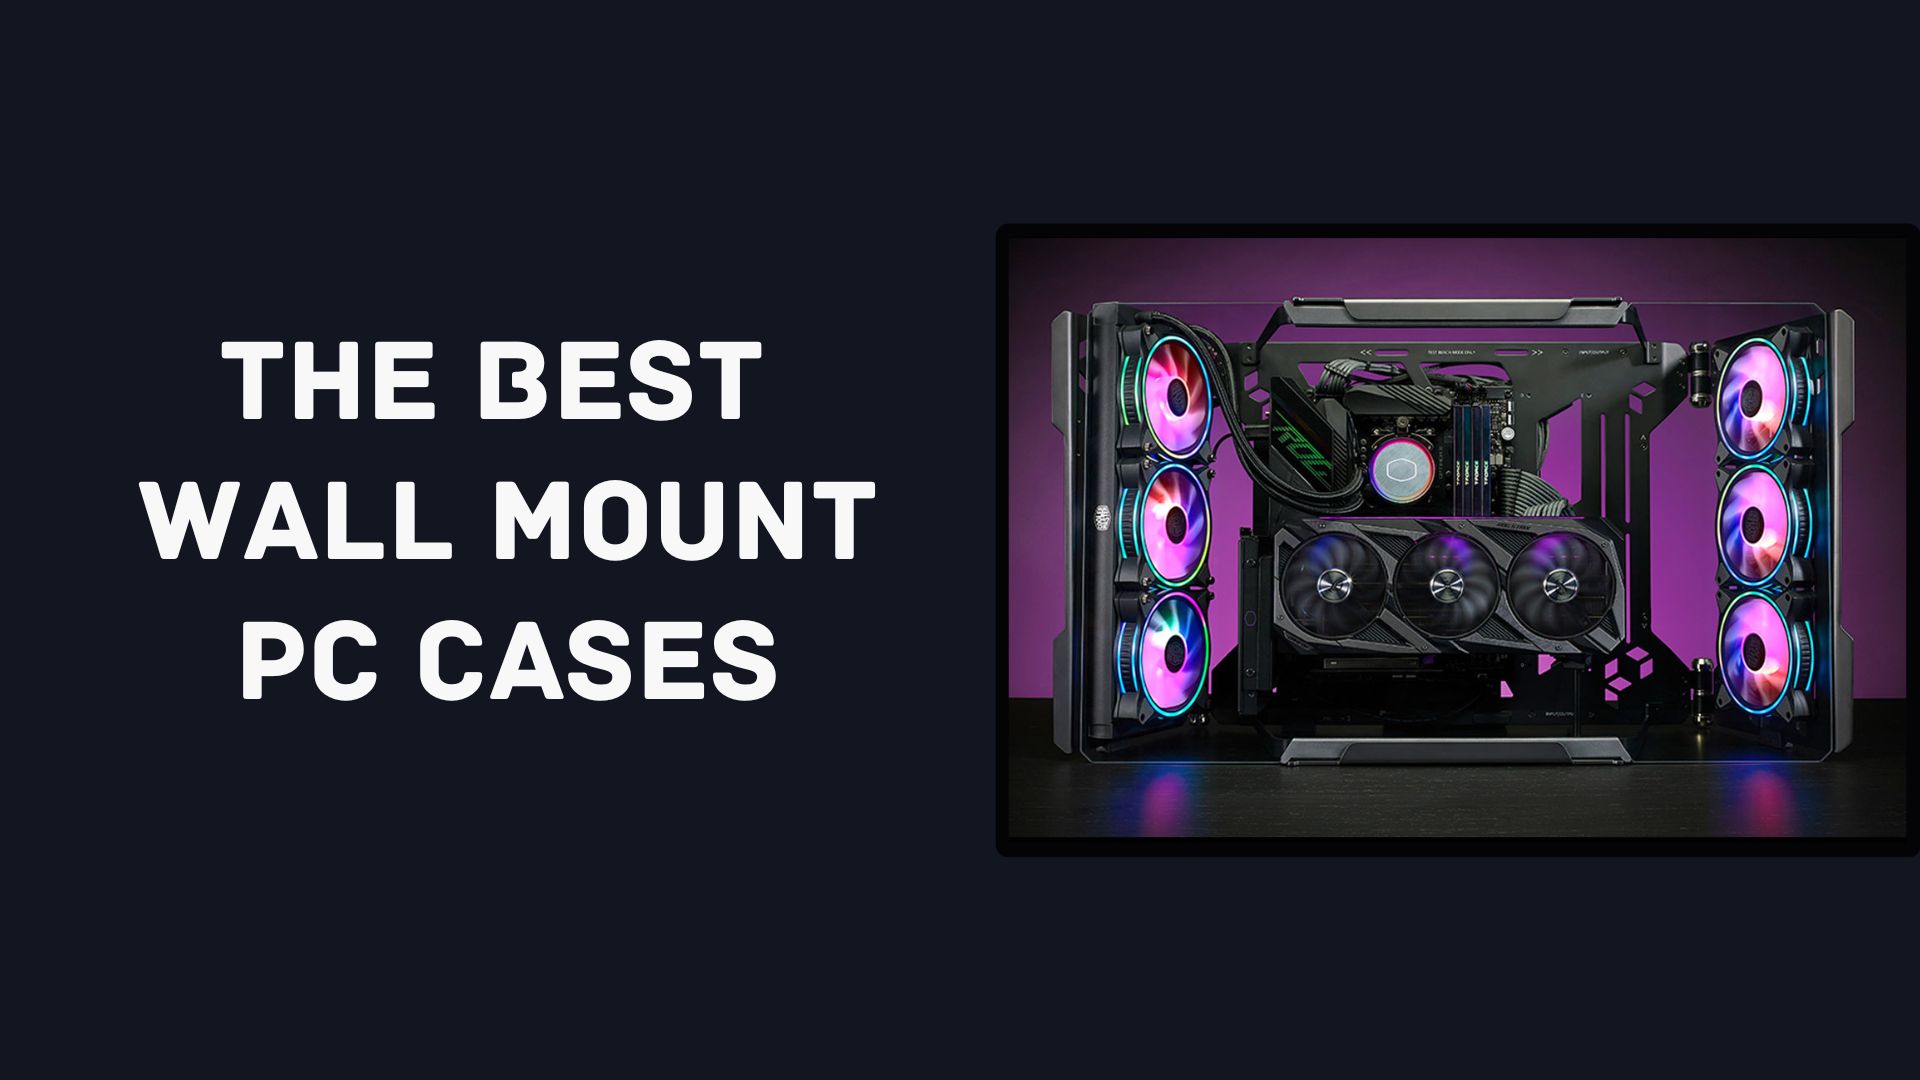 The best PC cases in 2024